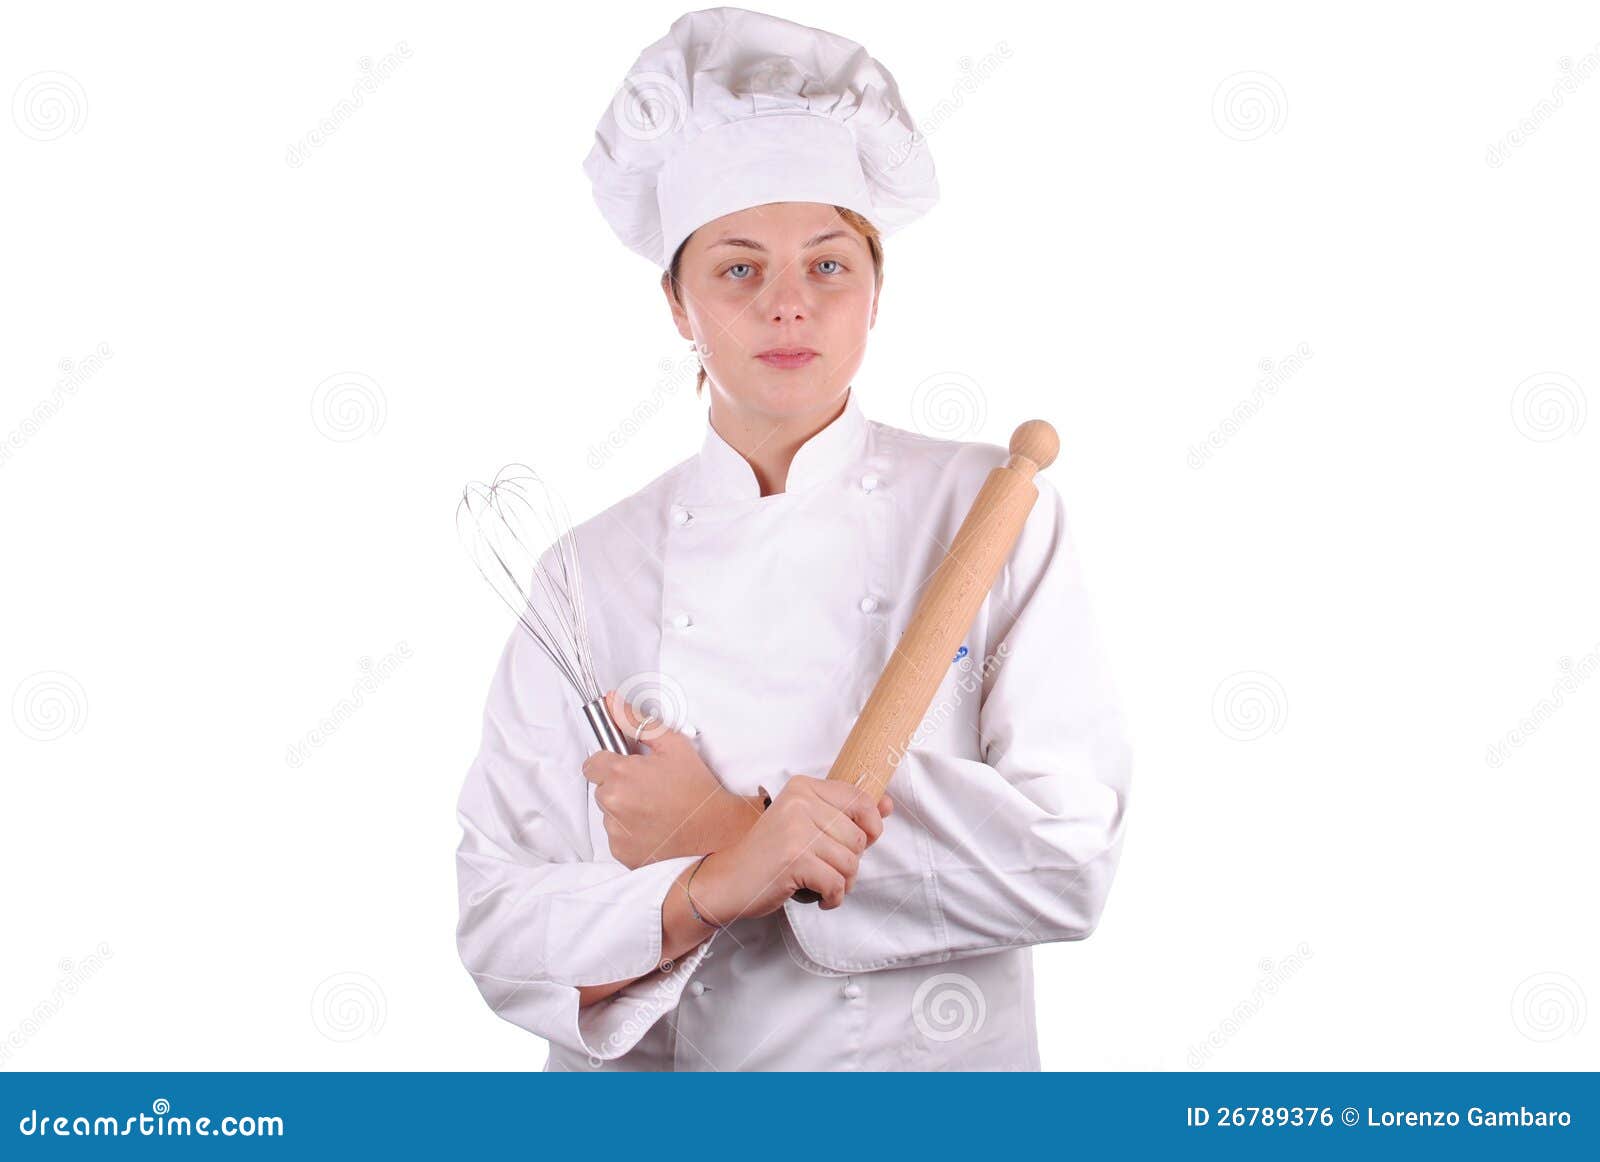 Young Female Executive Chef Stock Photo - Image of isolated, career ...